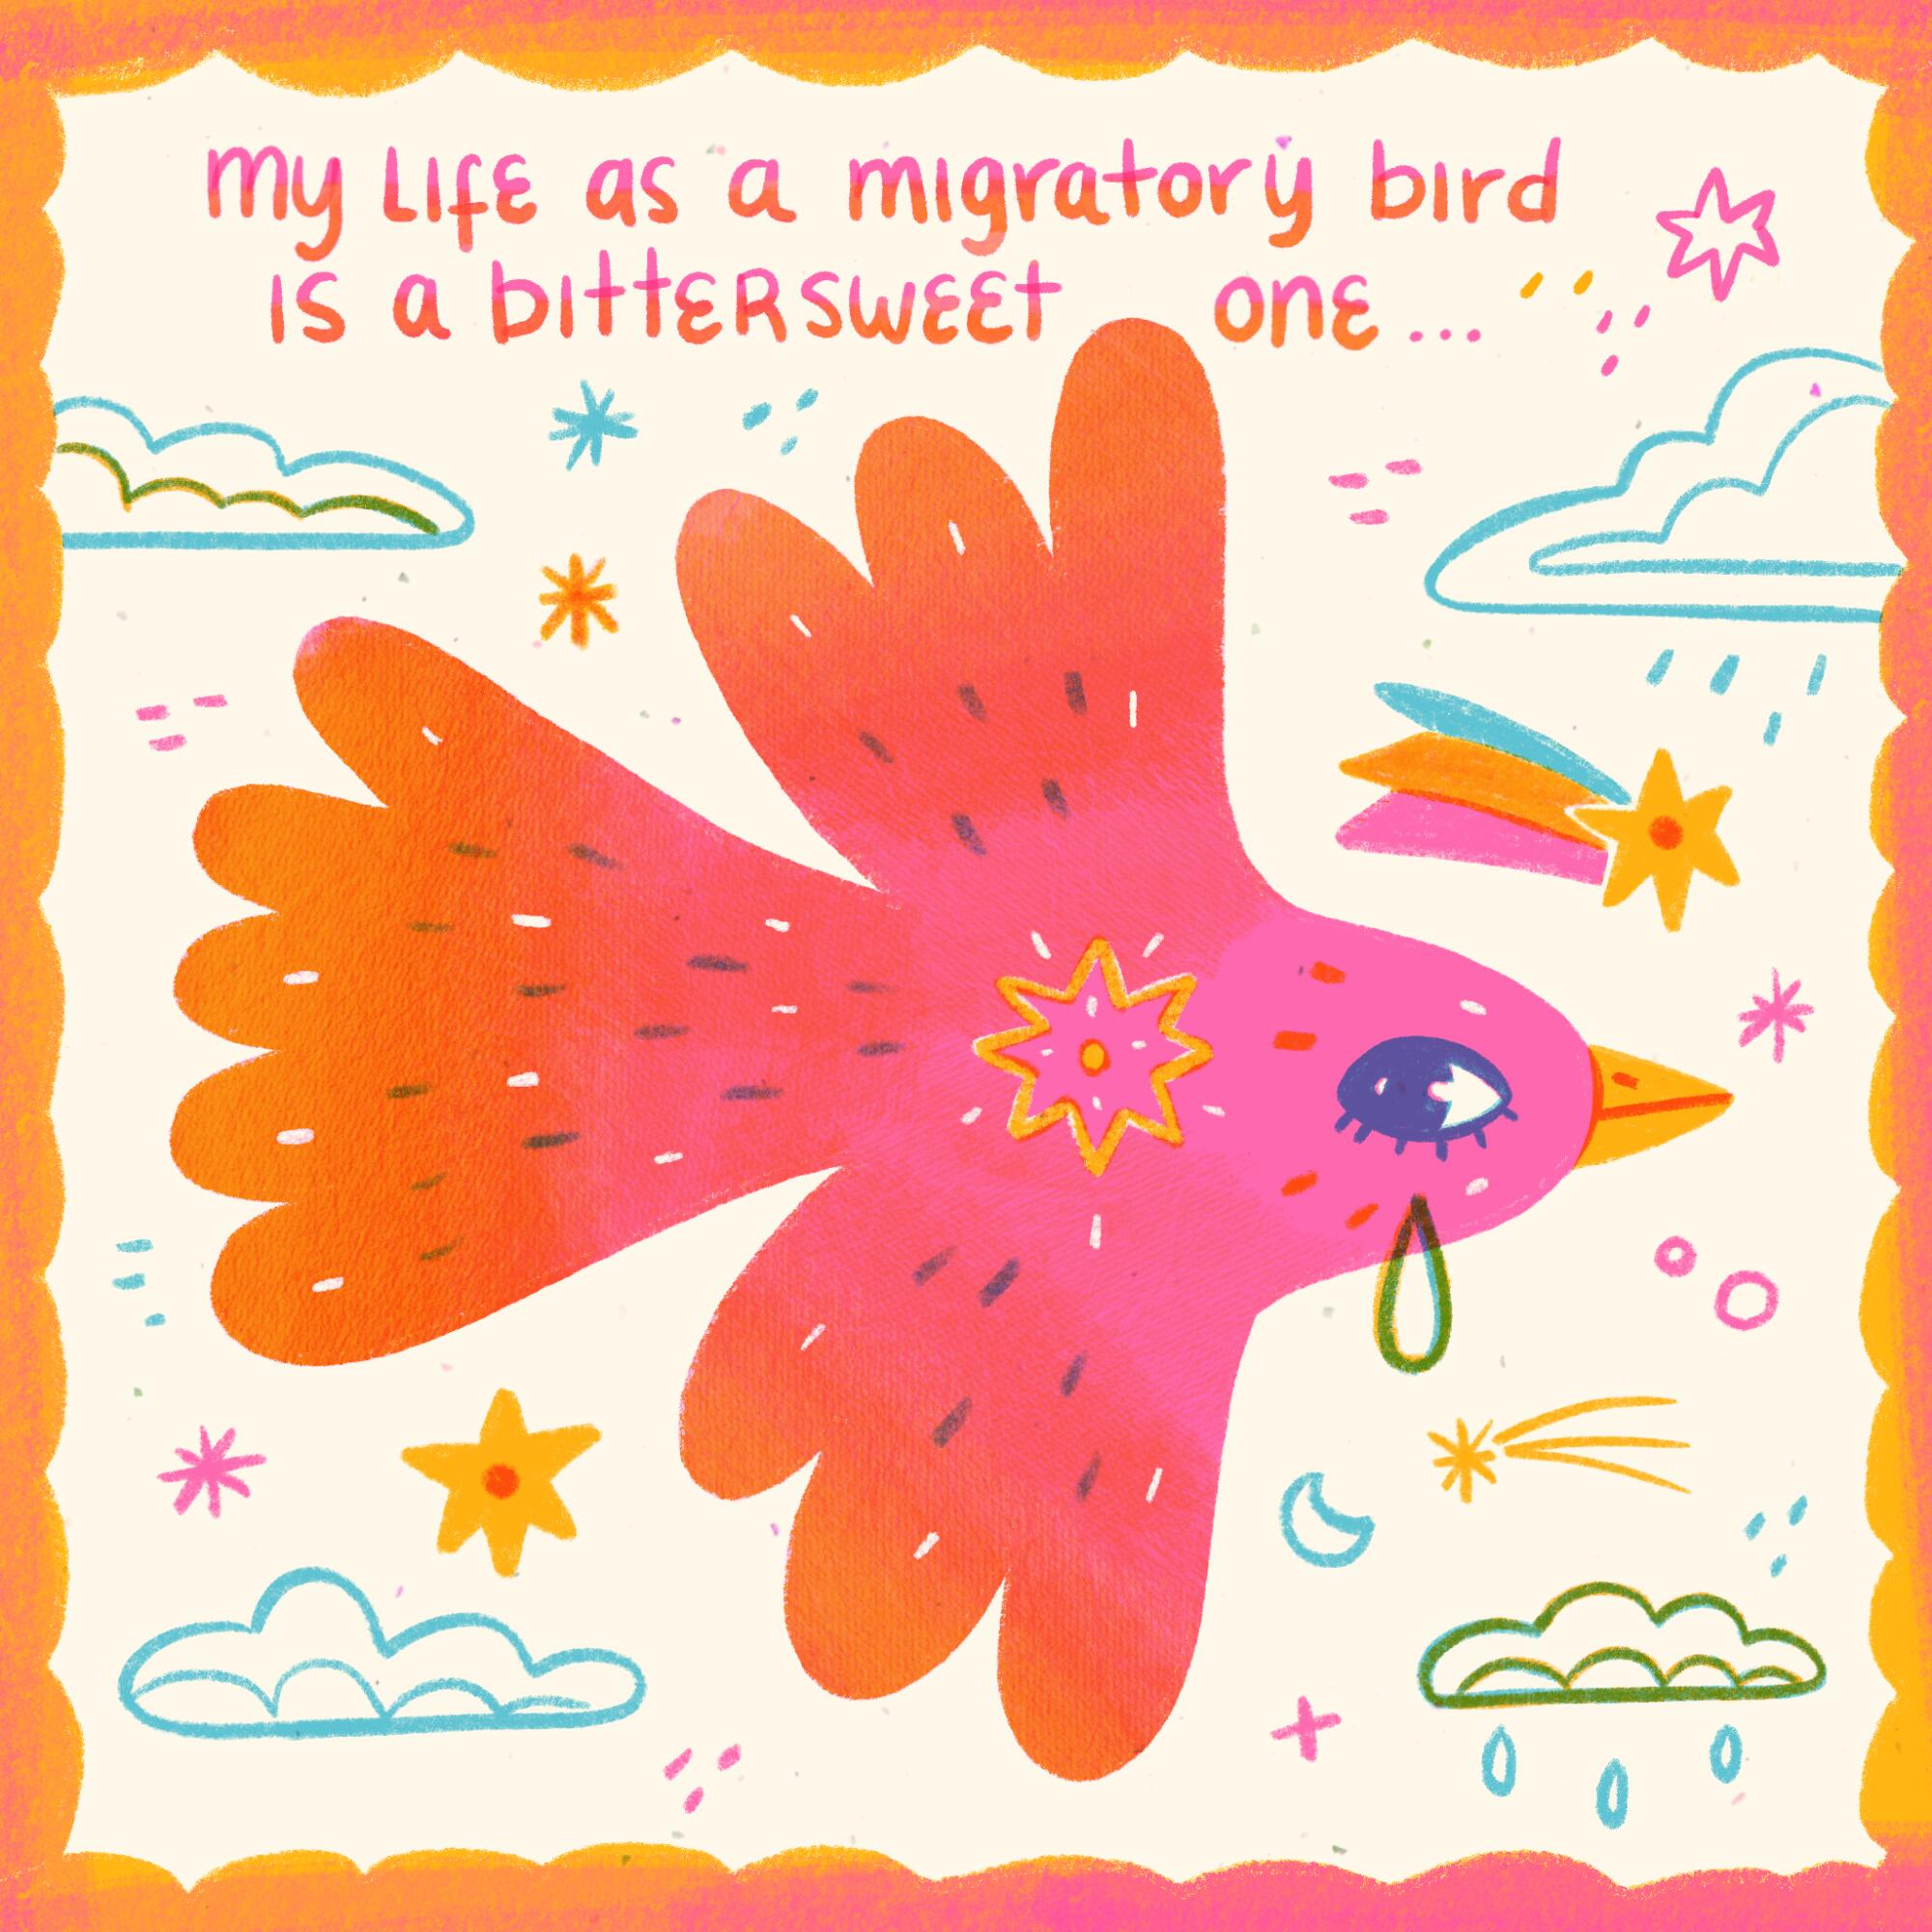 My life as a migratory bird is a bittersweet one ...